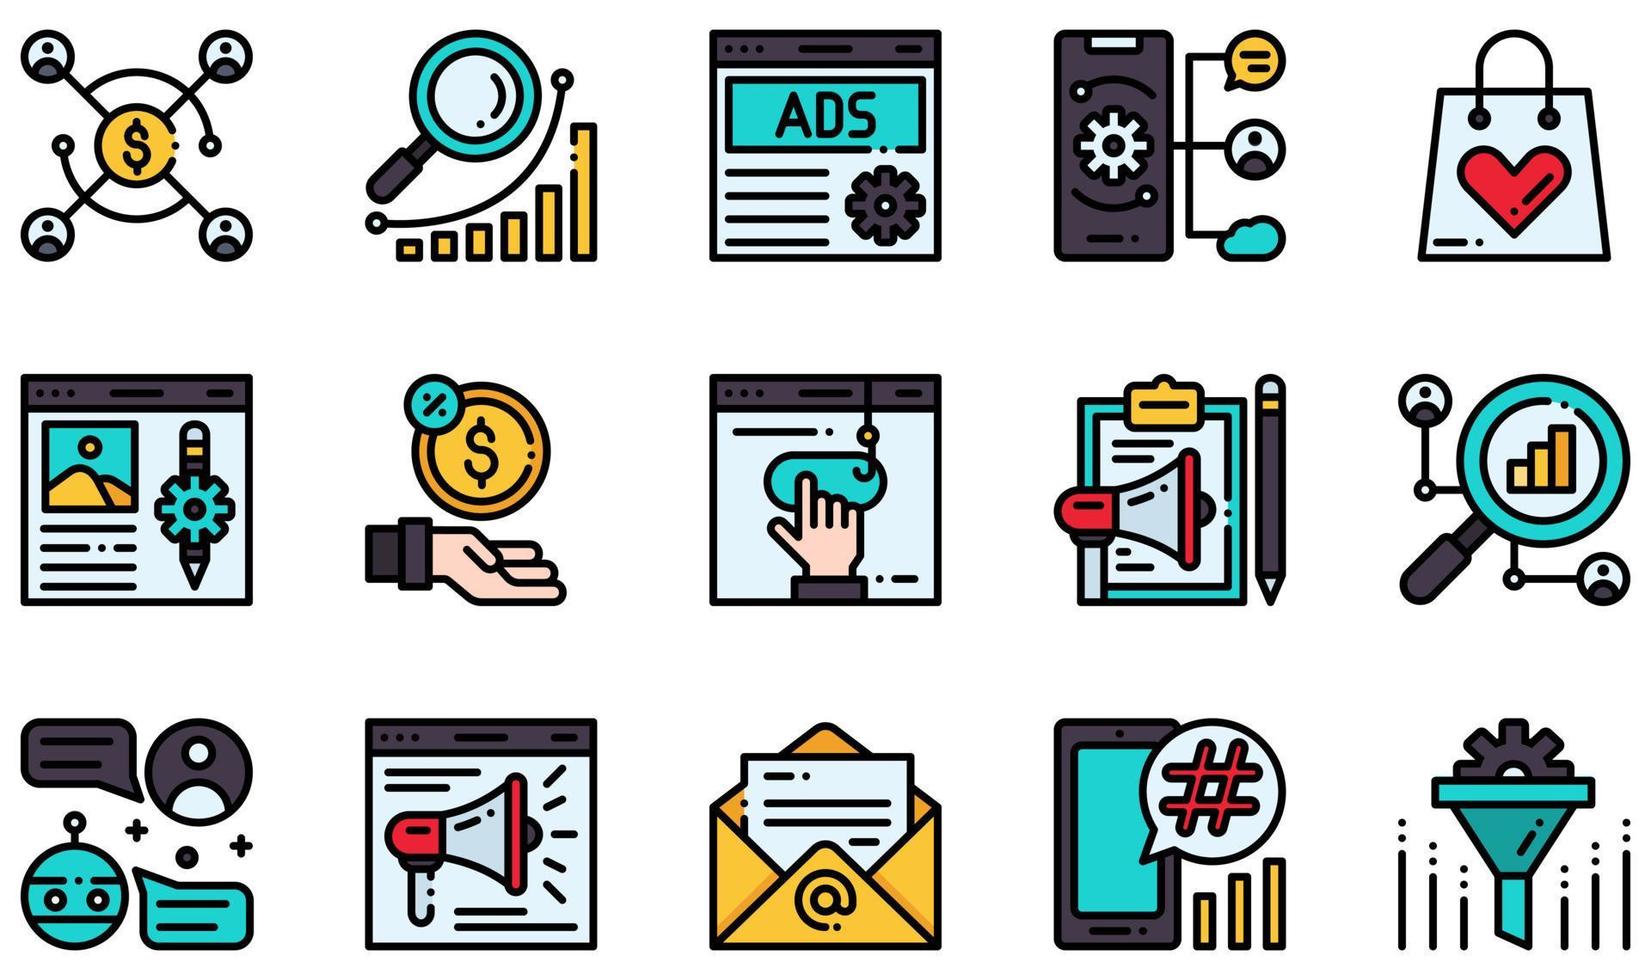 Set of Vector Icons Related to Digital Marketing. Contains such Icons as Affiliate Marketing, Advertising, Blog, Commission, Clickbait, Content Marketing and more.